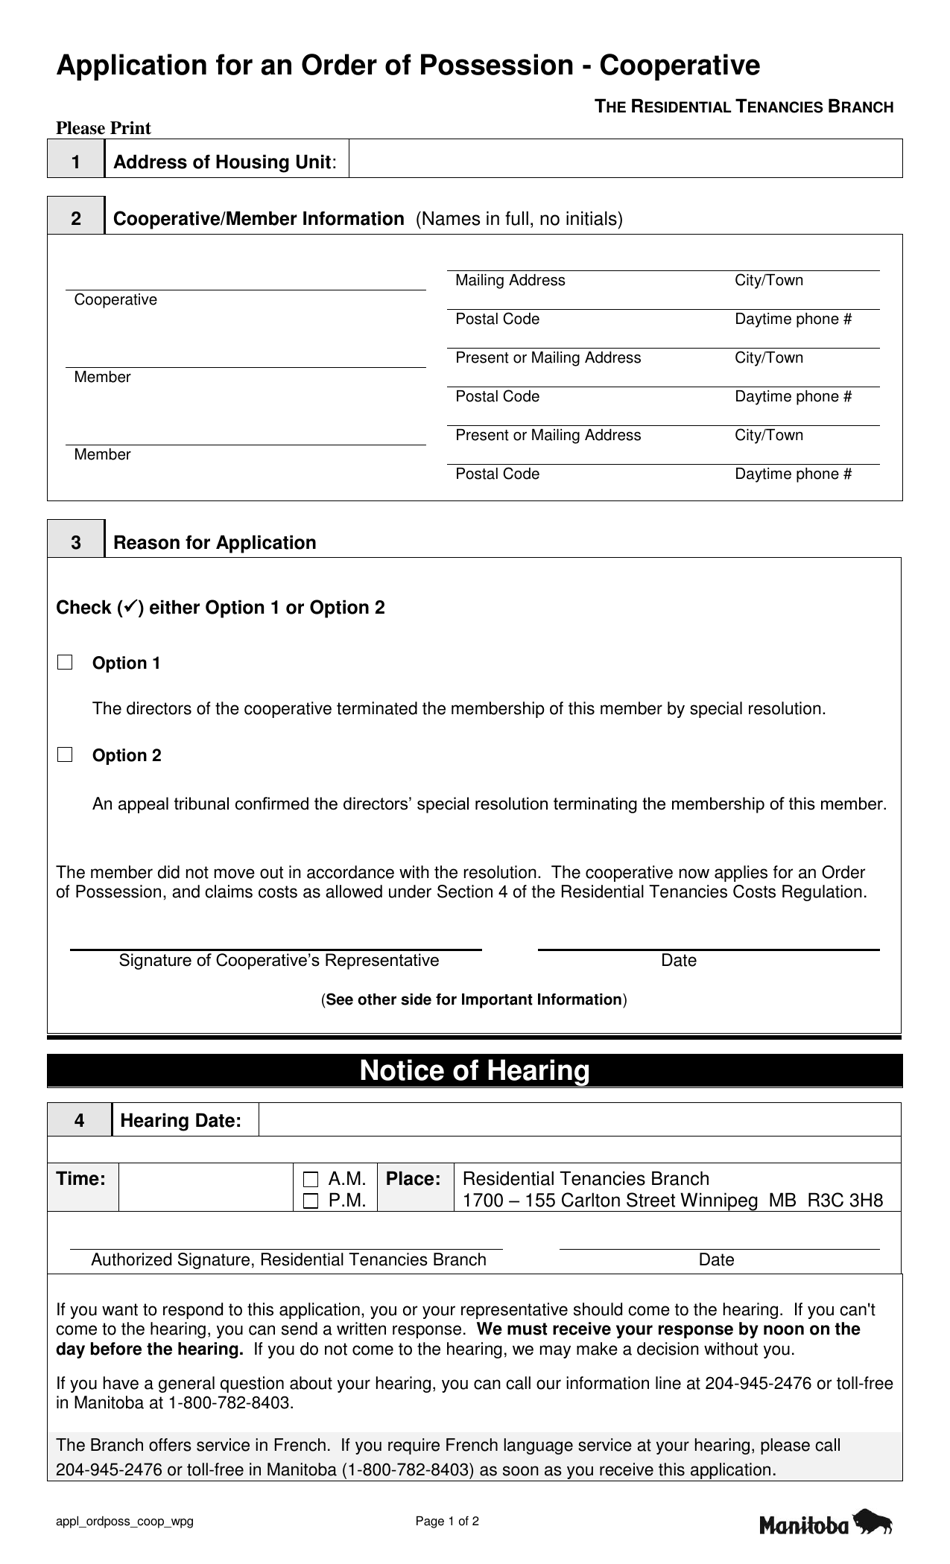 Application for an Order of Possession - Cooperative - Manitoba, Canada, Page 1